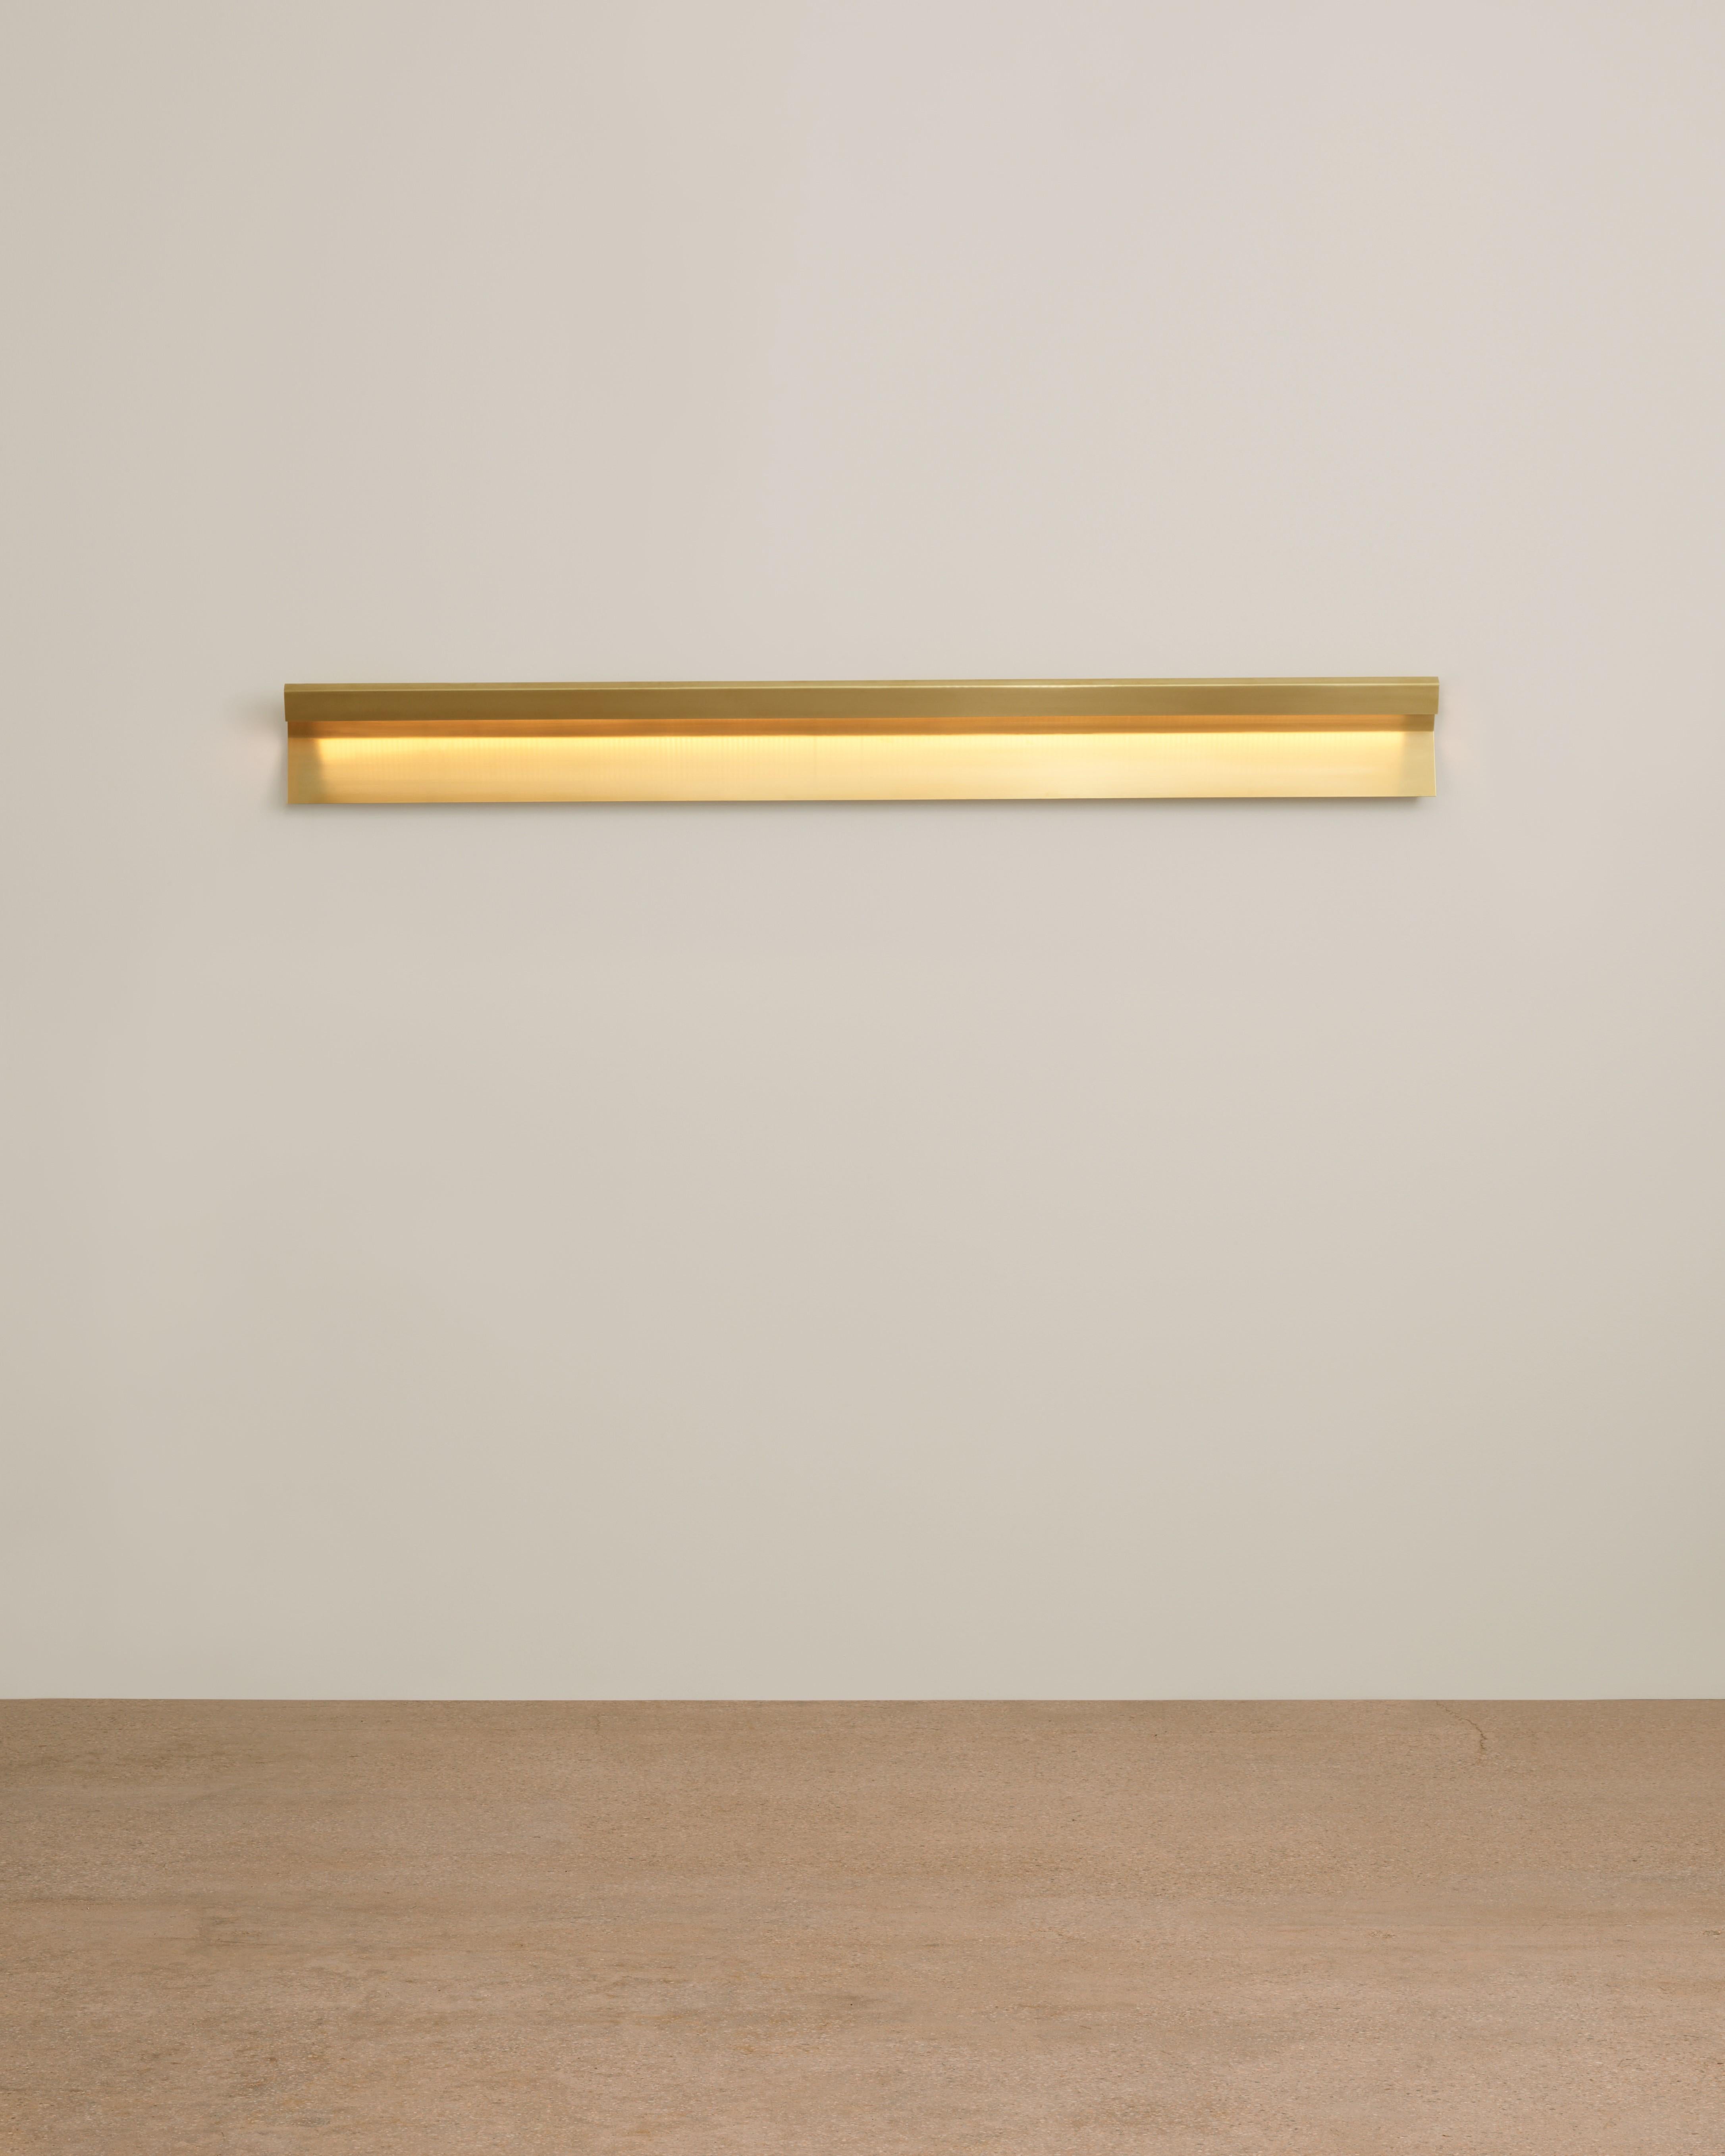 Mano wall-down lamp by Umberto Bellardi Ricci
Dimensions: W183 x D7.6 x H17.8 cm
Materials: Brasse, aluminium wall fixing, led strip in aluminium casing, 24V Driver.

All our lamps can be wired according to each country. If sold to the USA it